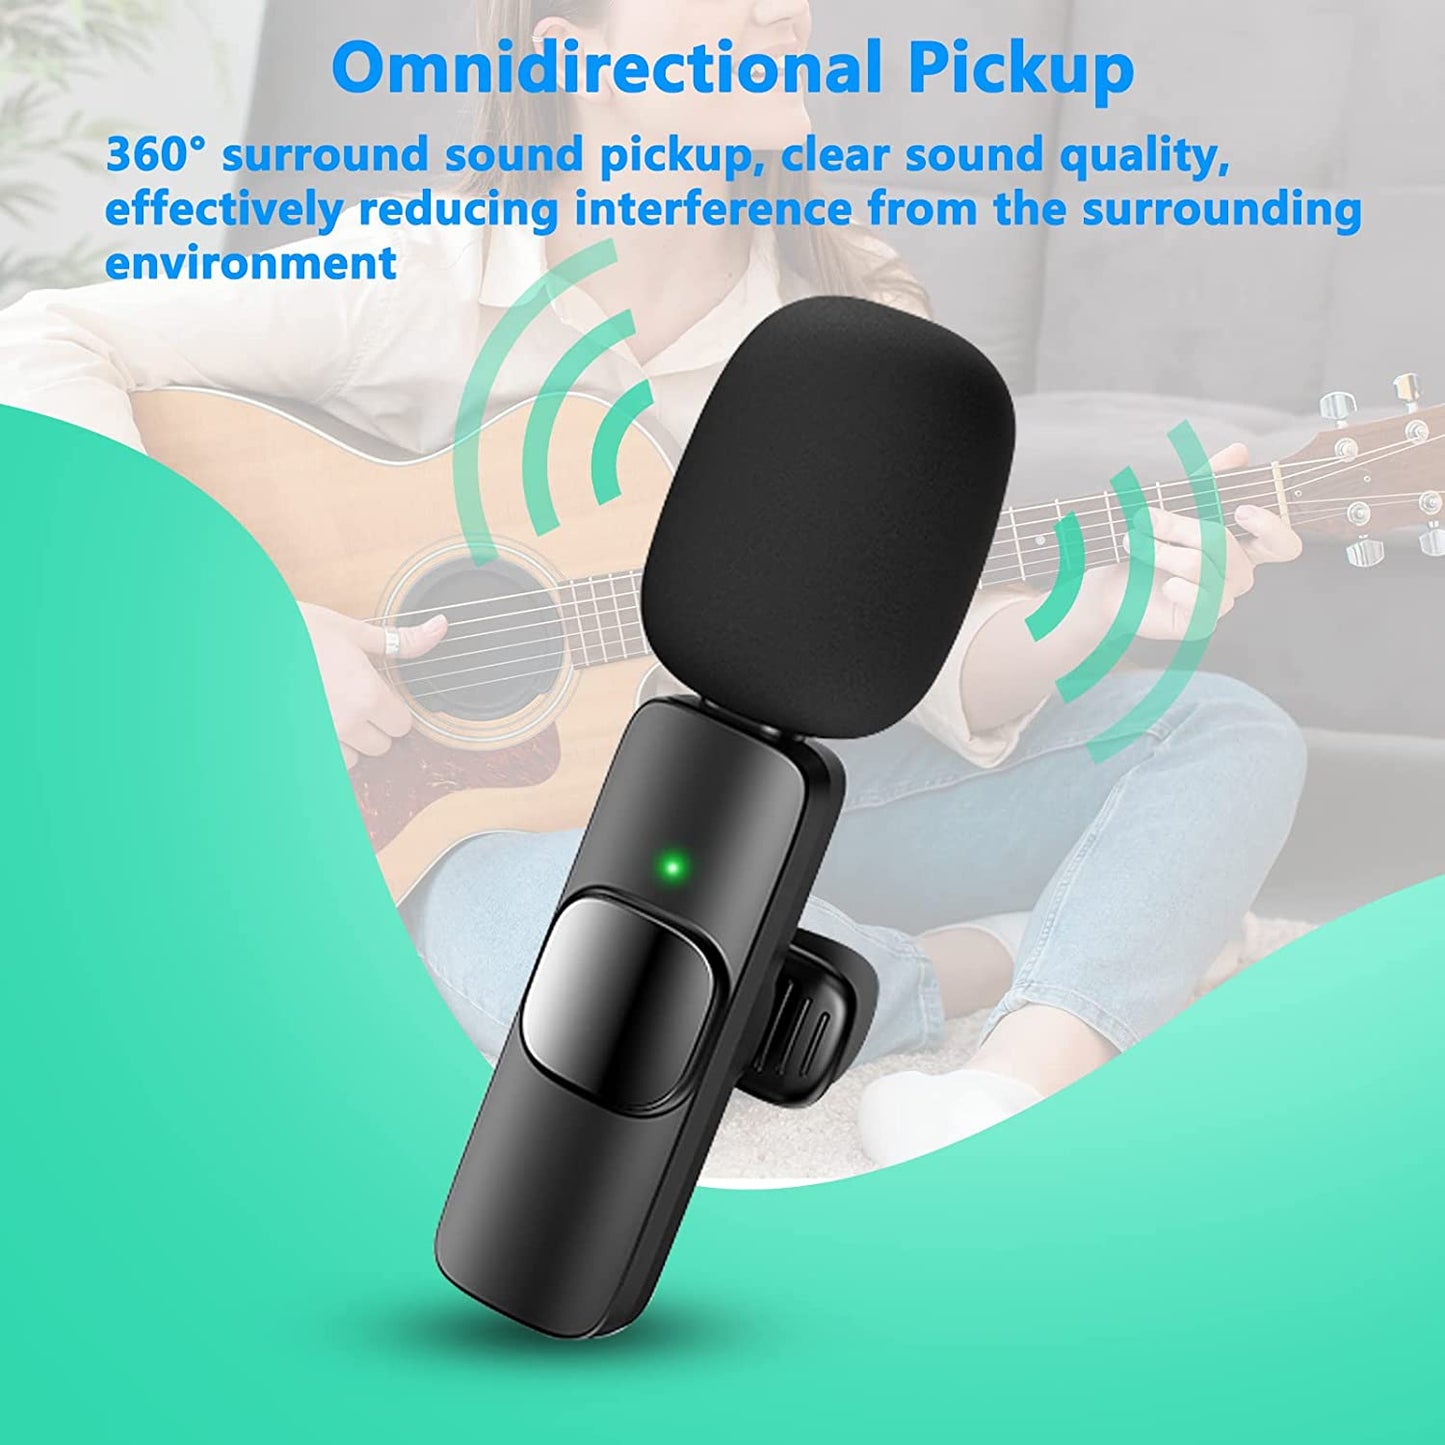 Wireless Lapel Microphone For IPhone IPad Professional Wireless Clip Mic - Cordless Omnidirectional Condenser Recording Mic For Interview Video Podcast Vlog YouTube